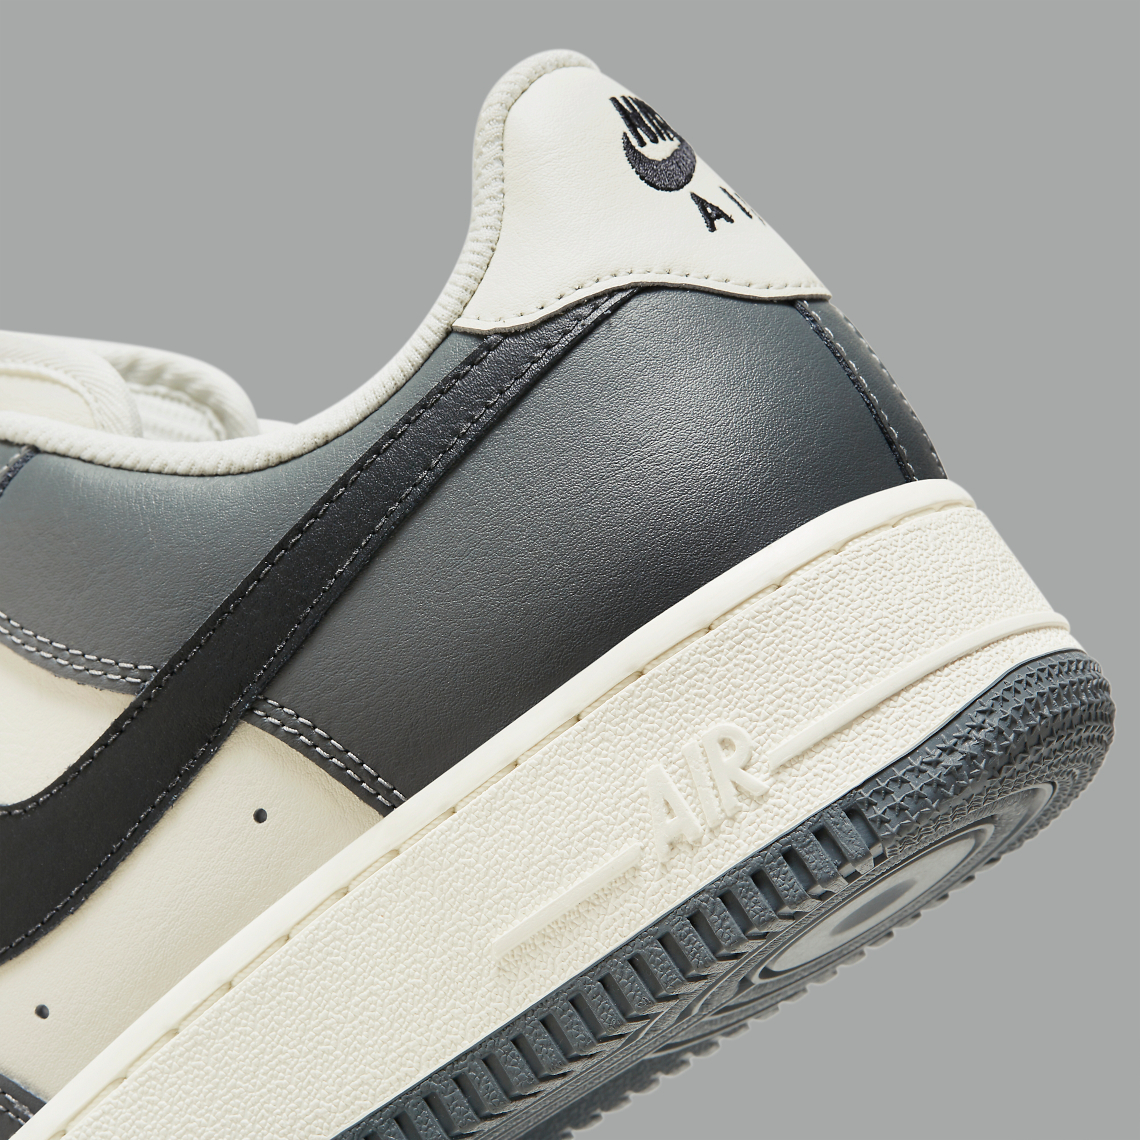 Nike Air Force 1 Low Sail Grey Black FD9063-100 Release Date